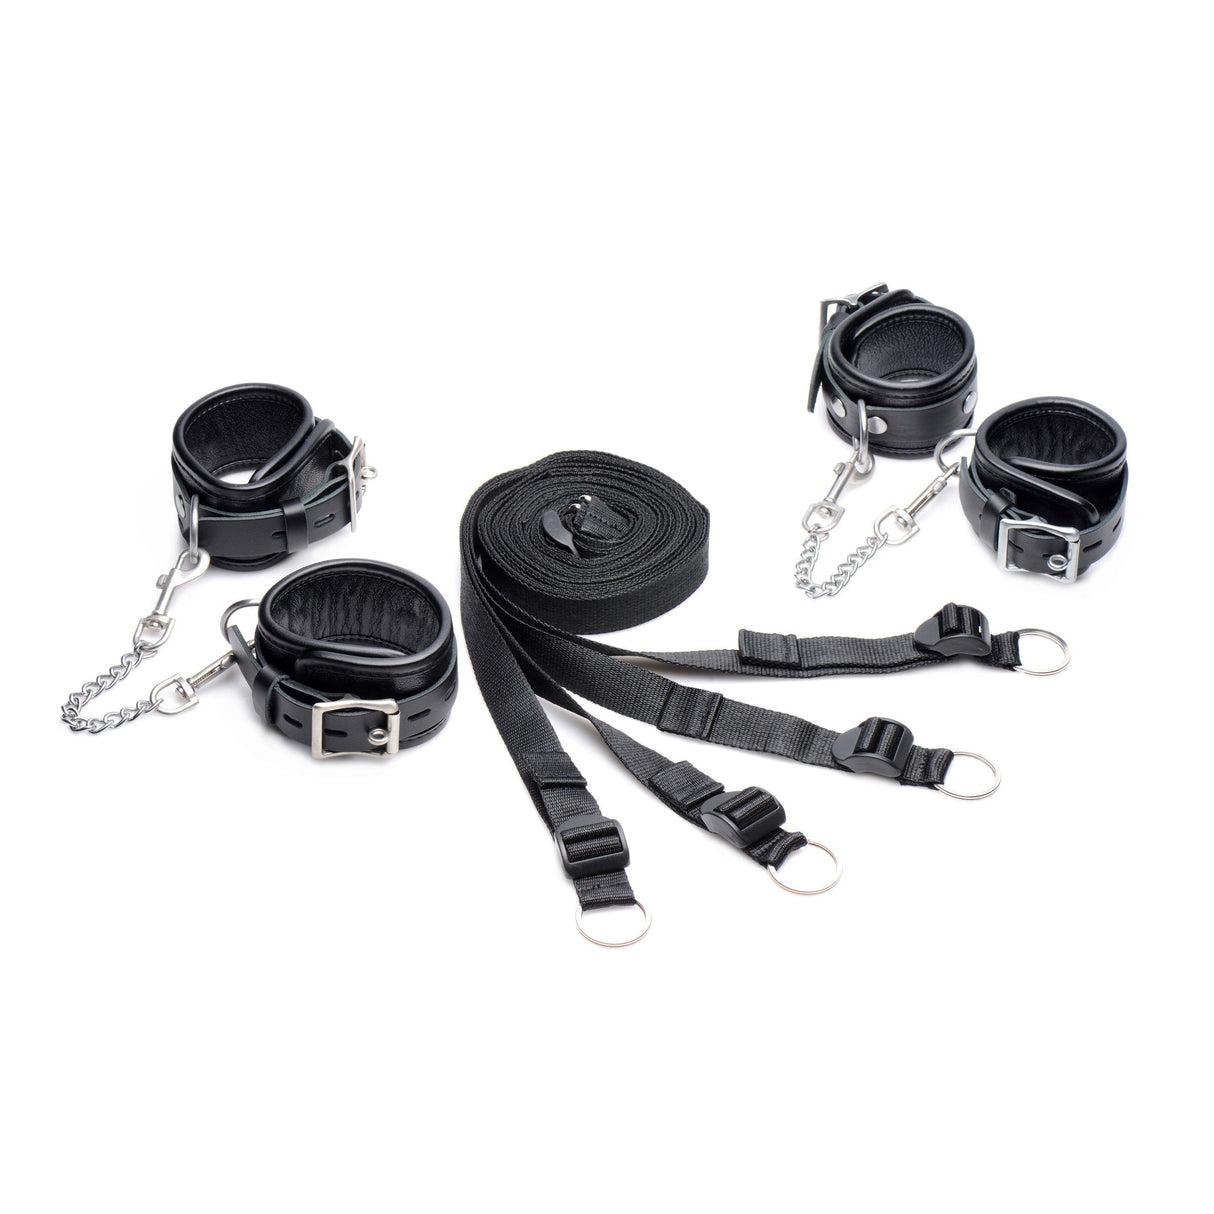 Isabella Sinclaire Leather Bed Restraint Kit